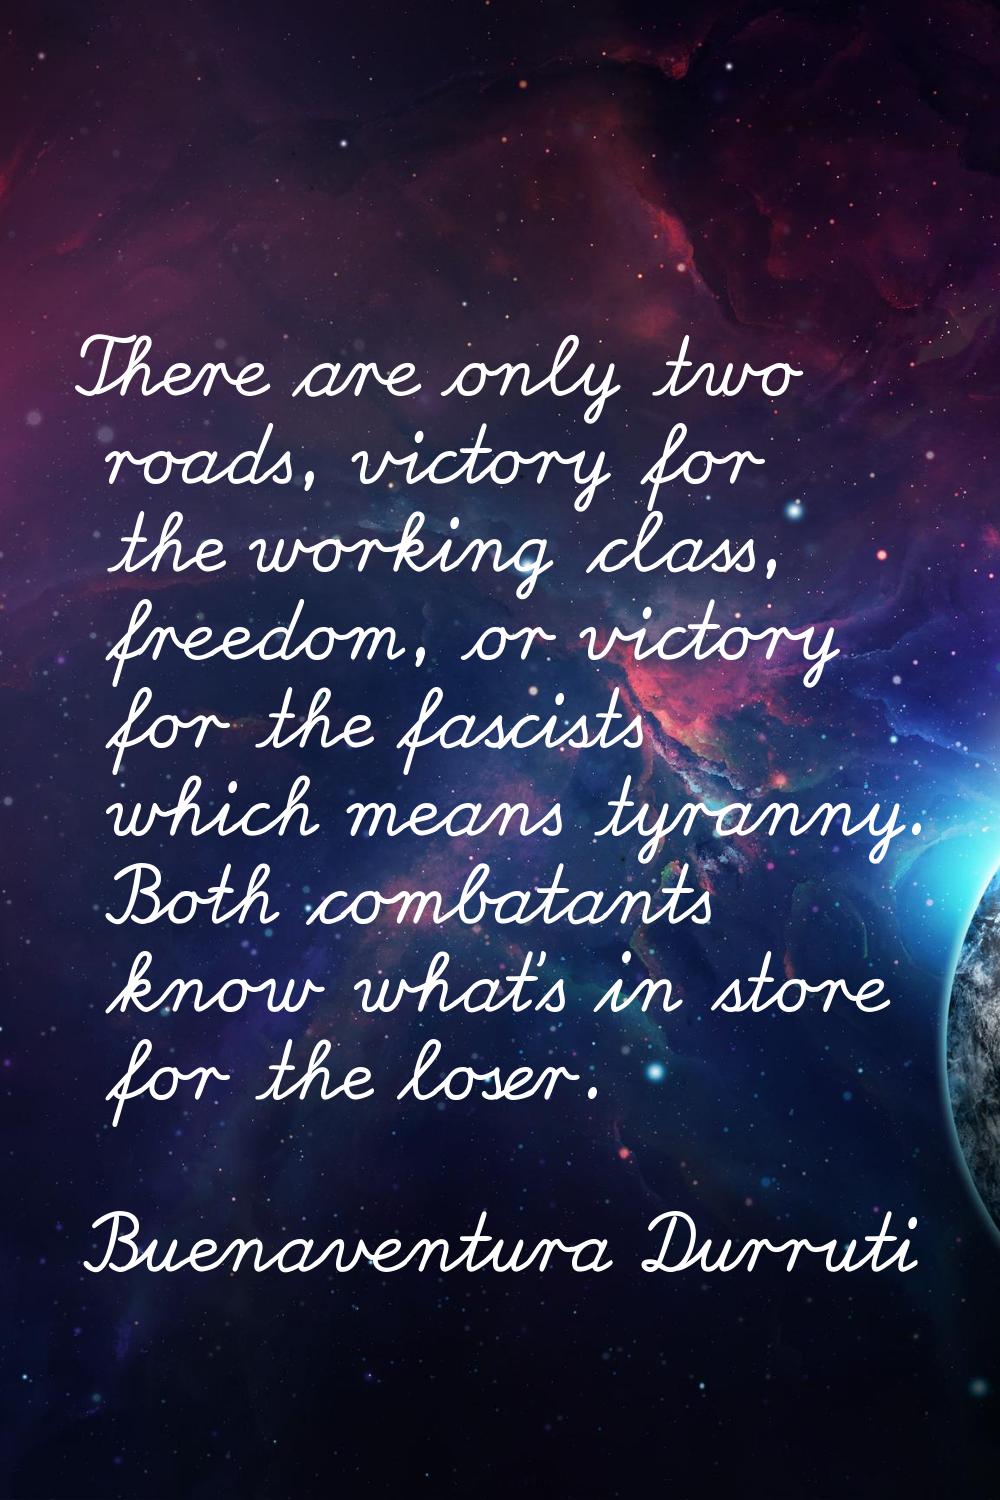 There are only two roads, victory for the working class, freedom, or victory for the fascists which